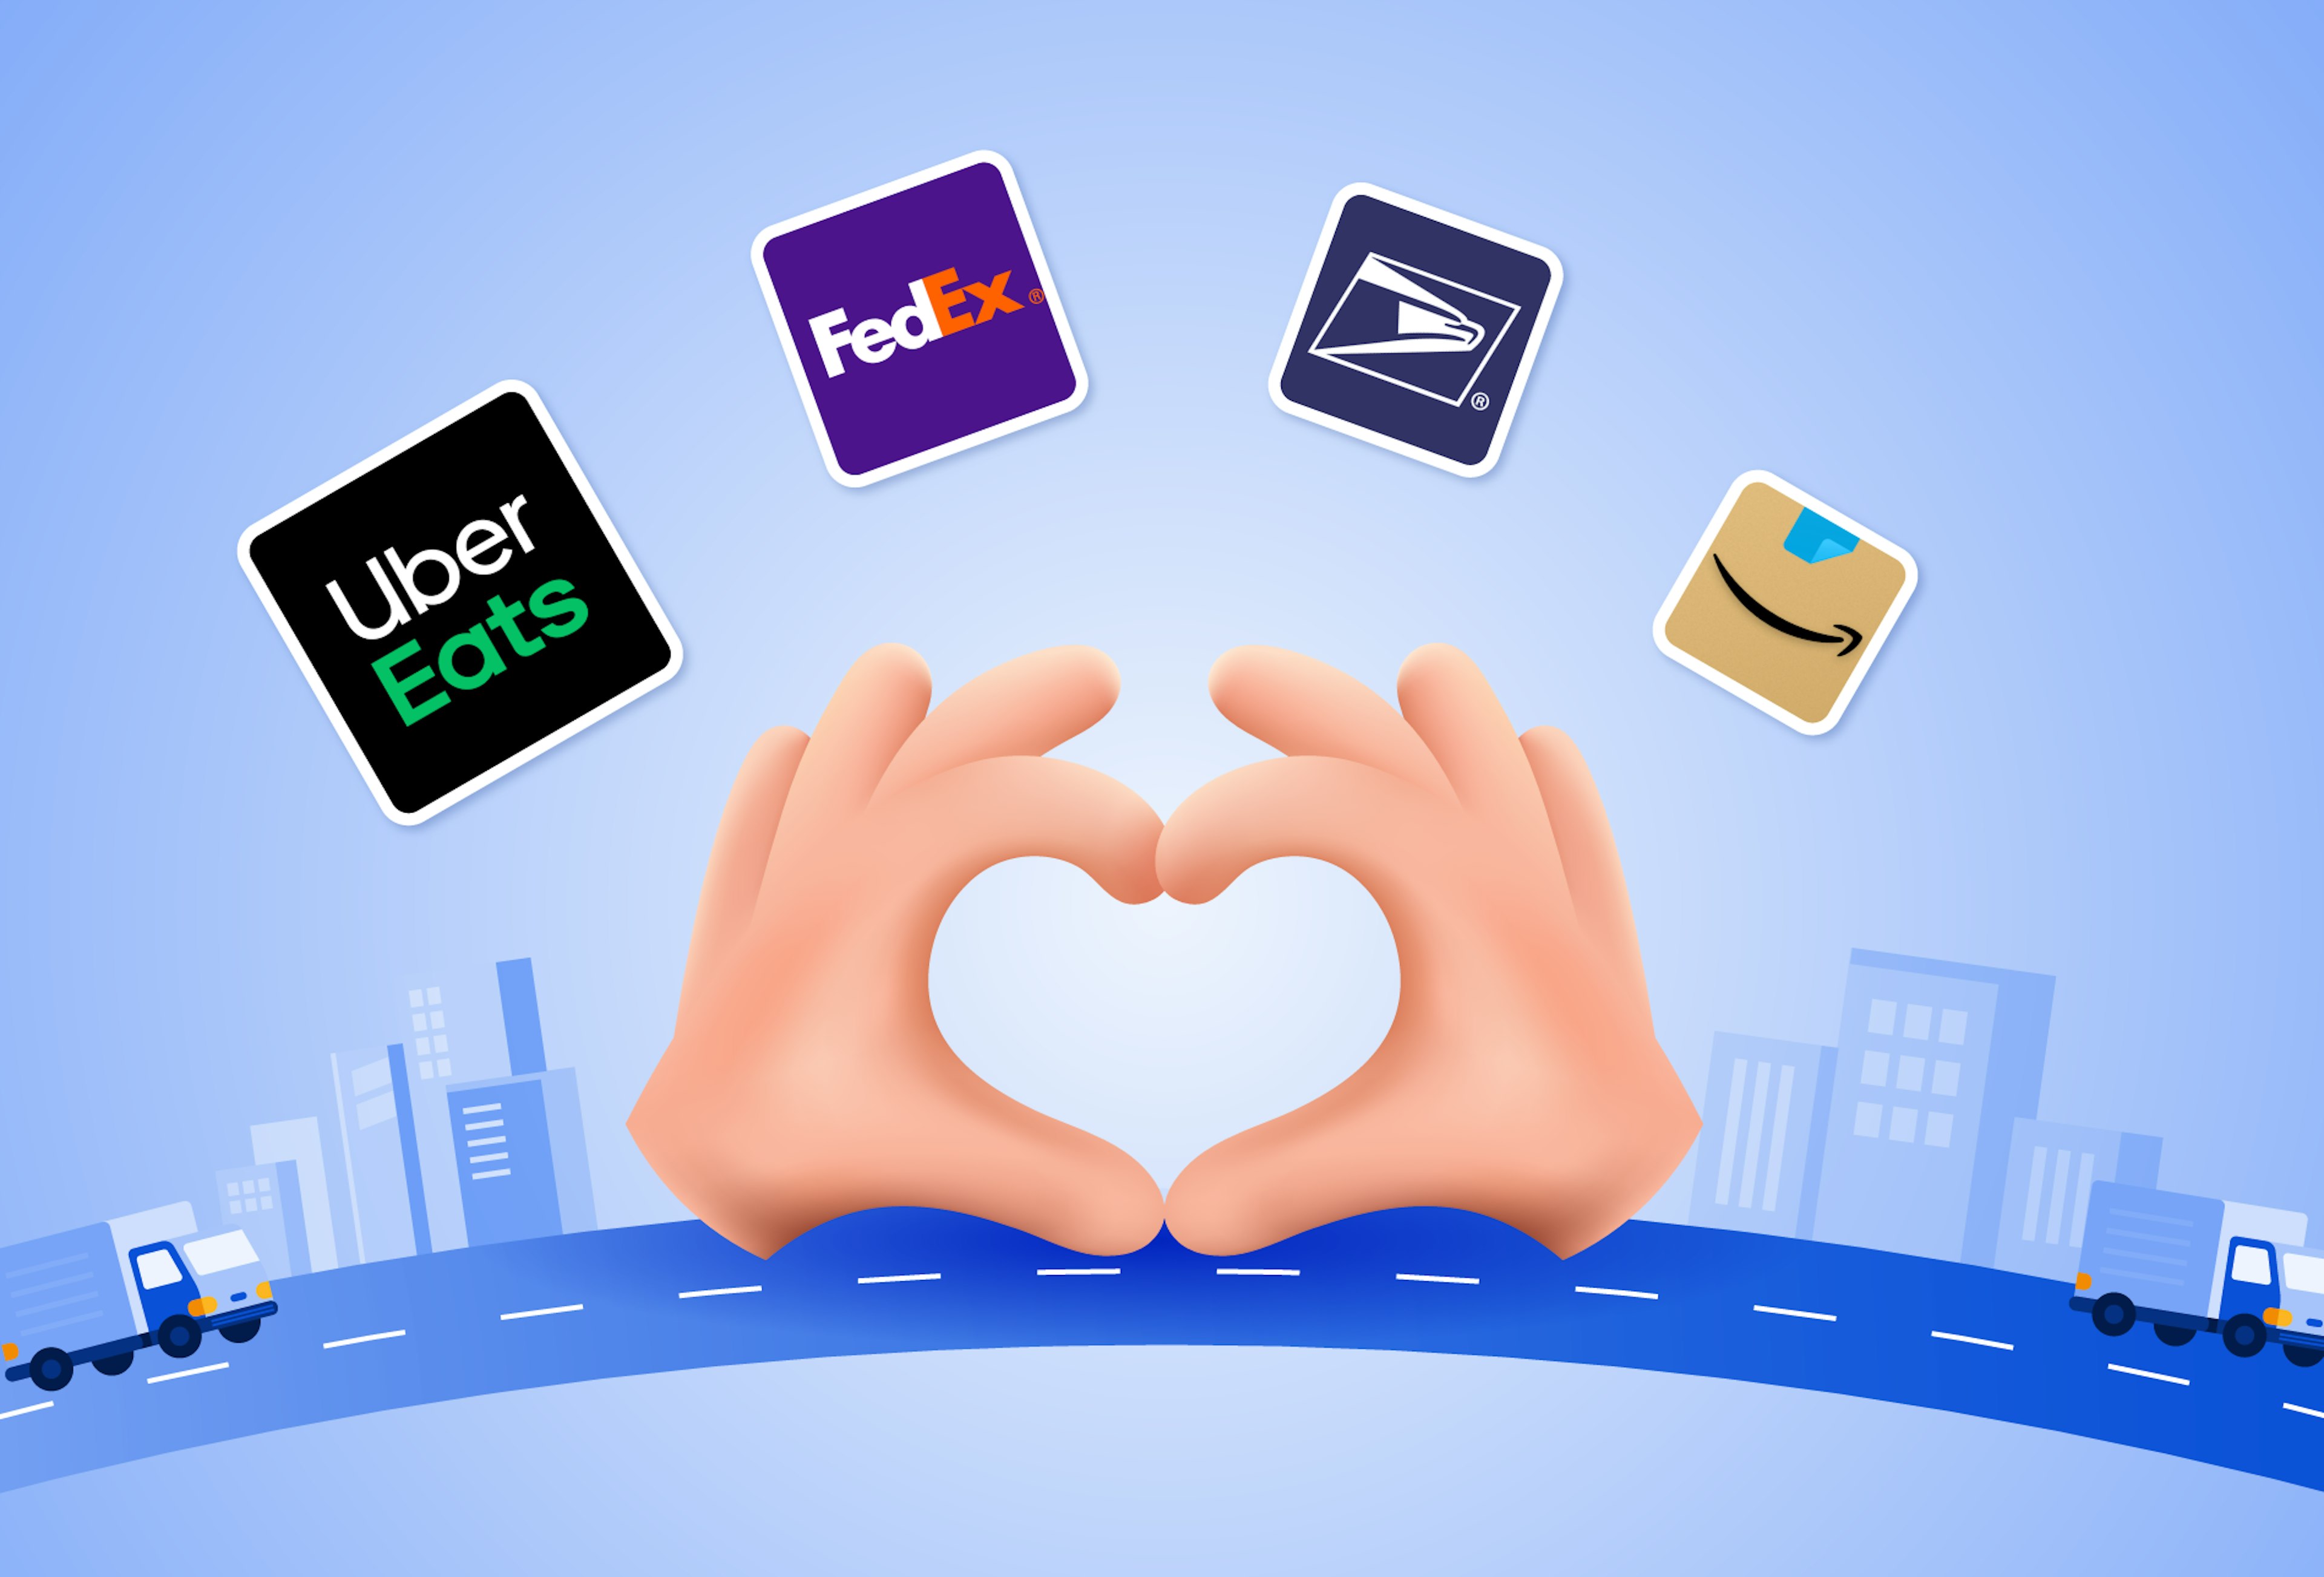 Delivery service company logos with heart hands emoji